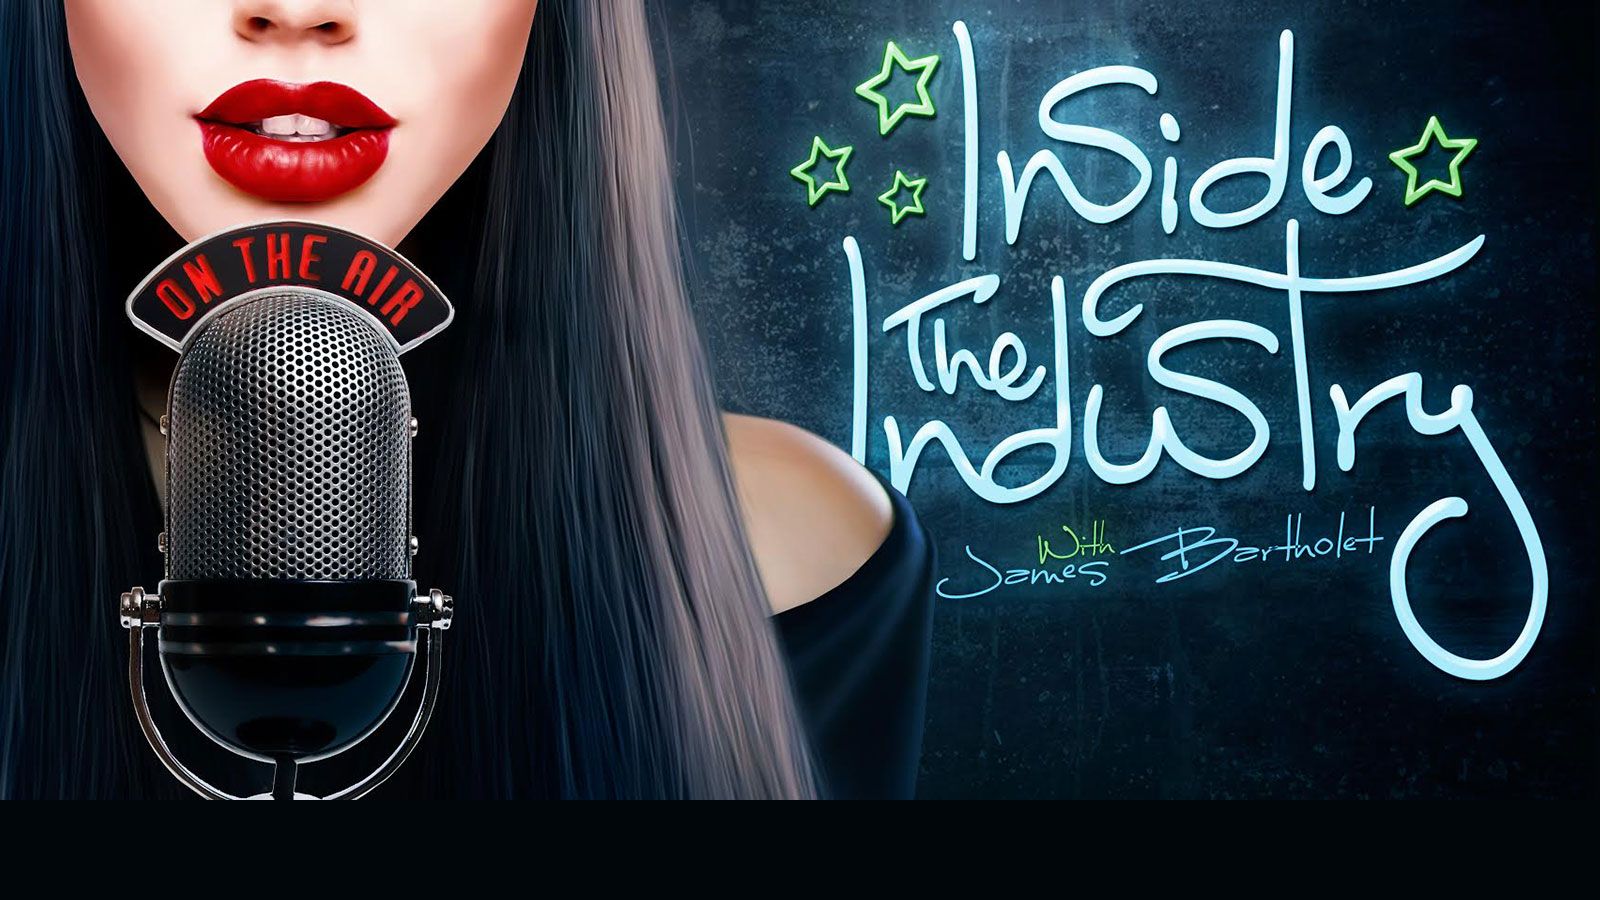 Kat Dior, Riley Steele On Inside The Industry Tonight